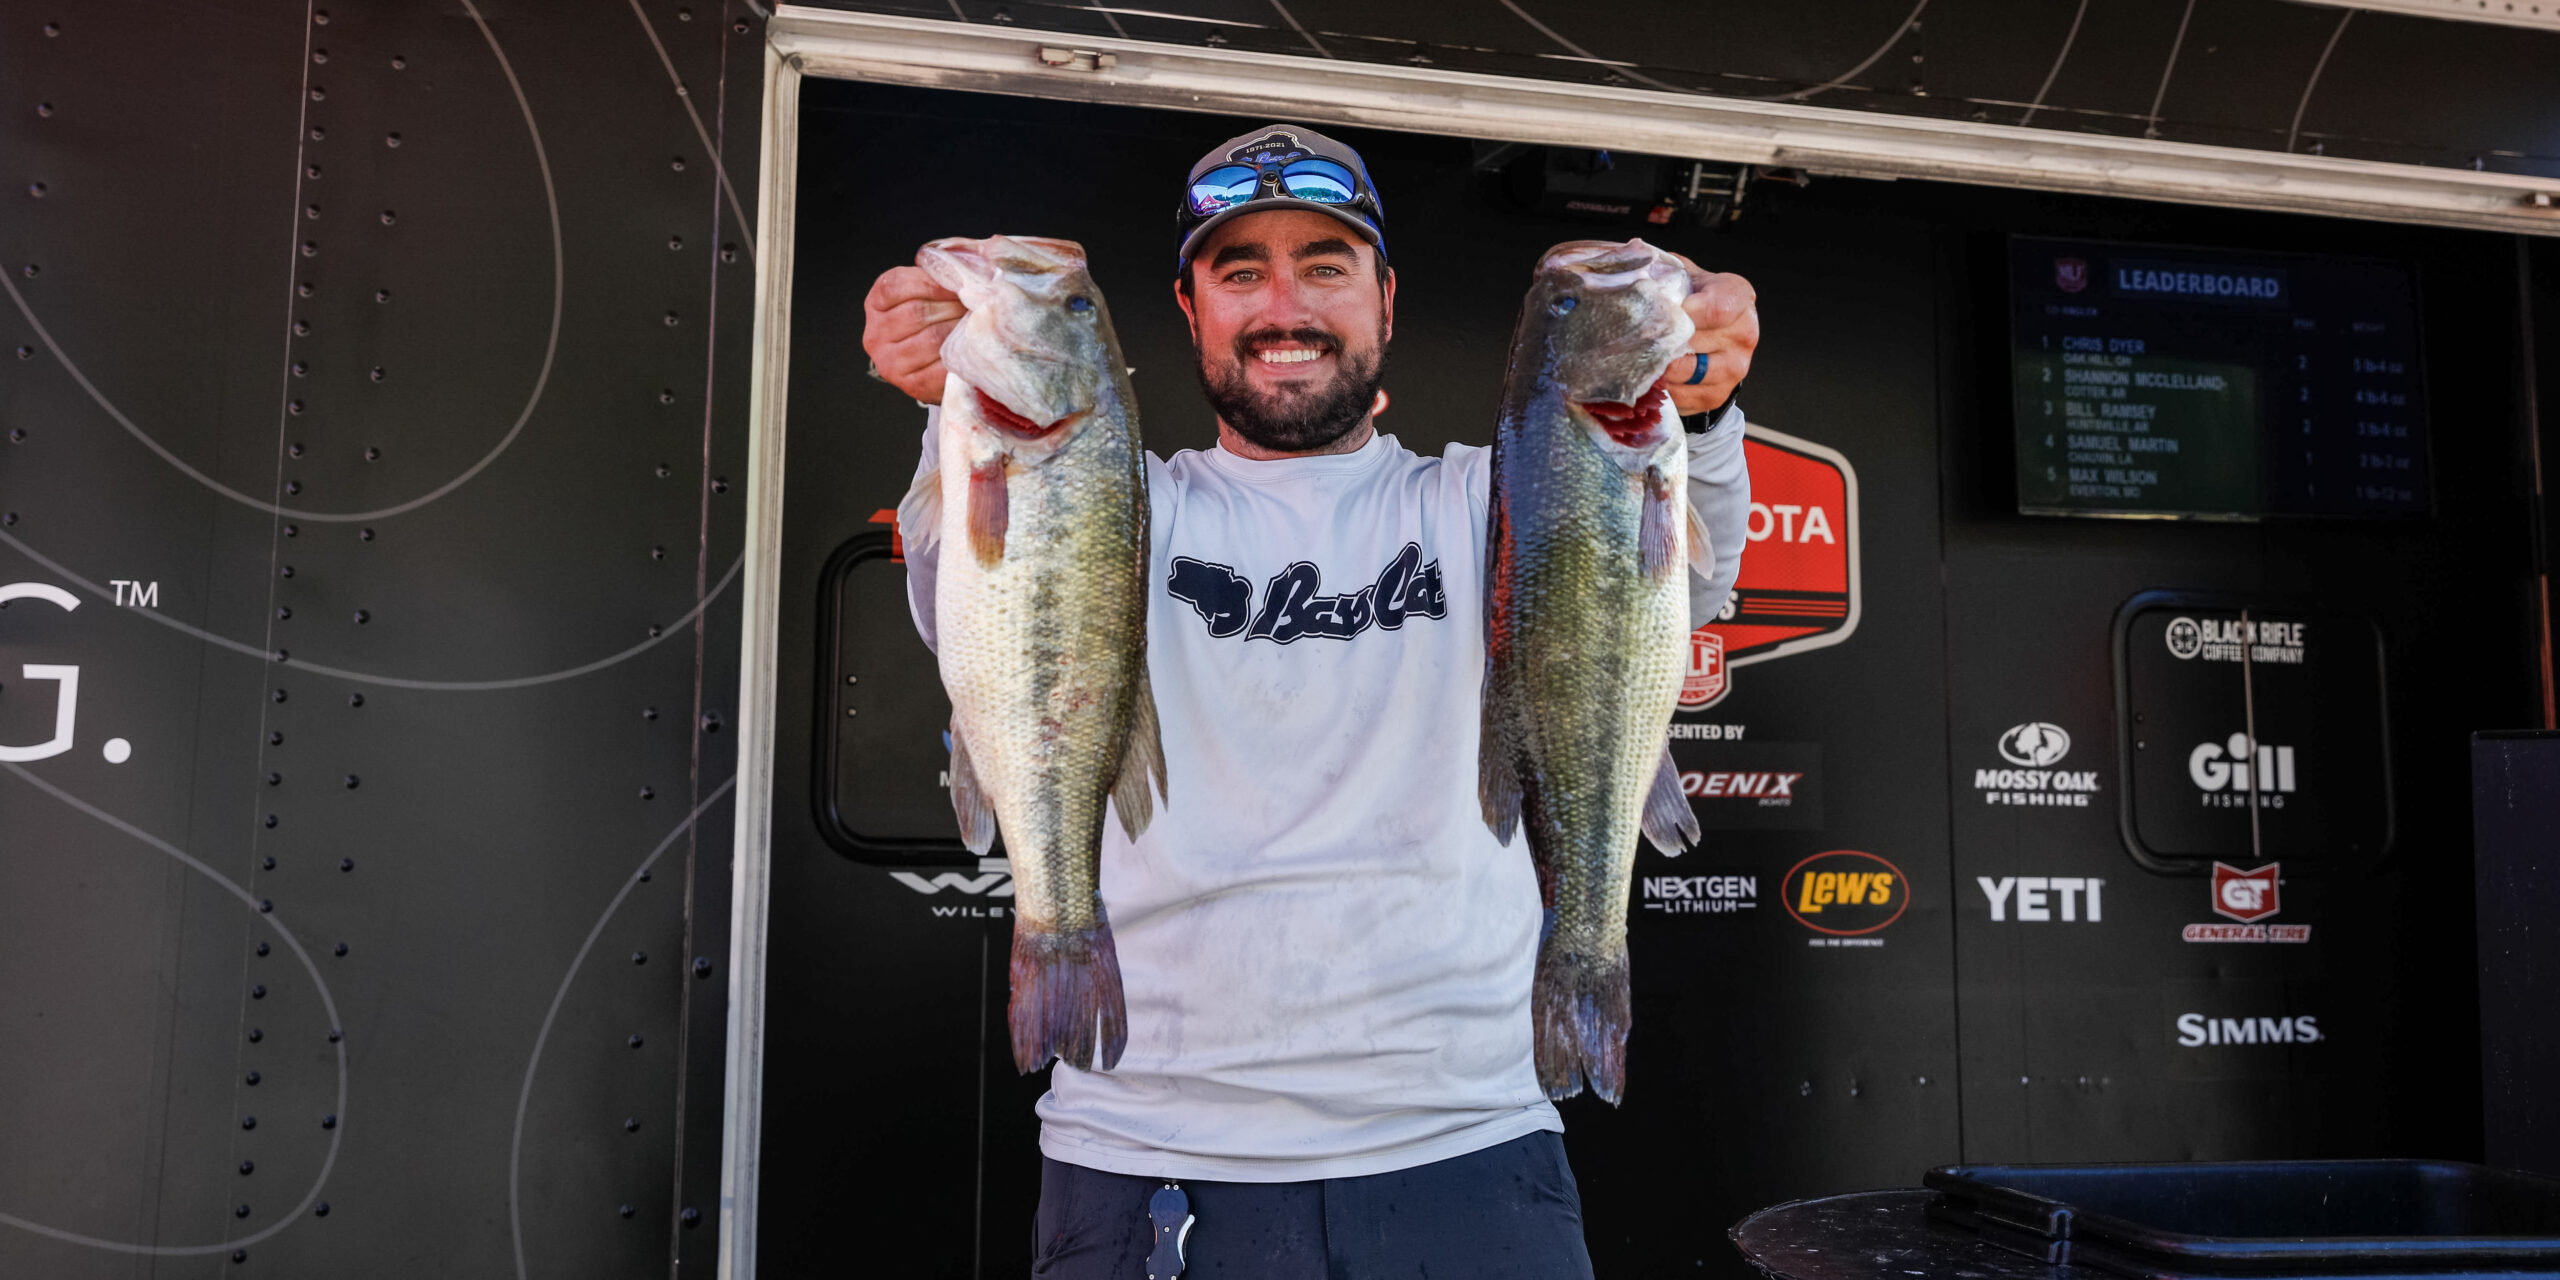 Harriman ahead with 20-plus at Lake of the Ozarks - Major League Fishing